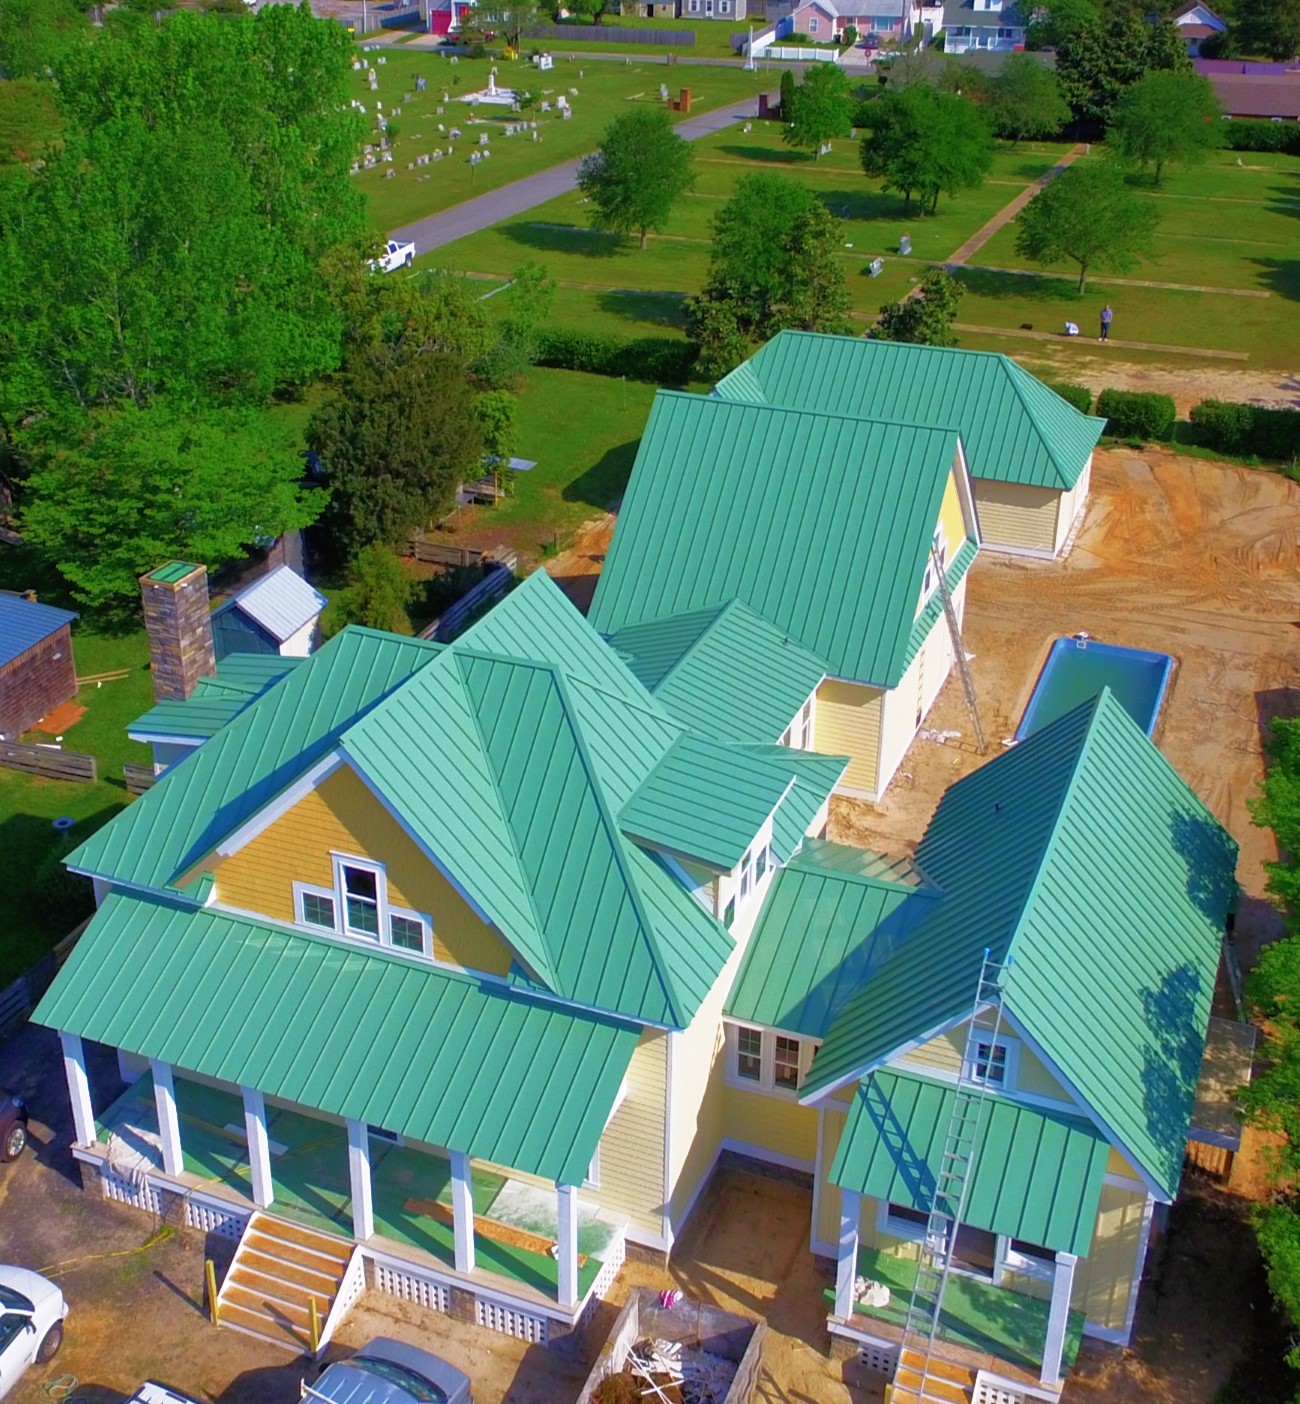 Gallop Roofing & Remodeling, Inc. of Wanchese, North Carolina